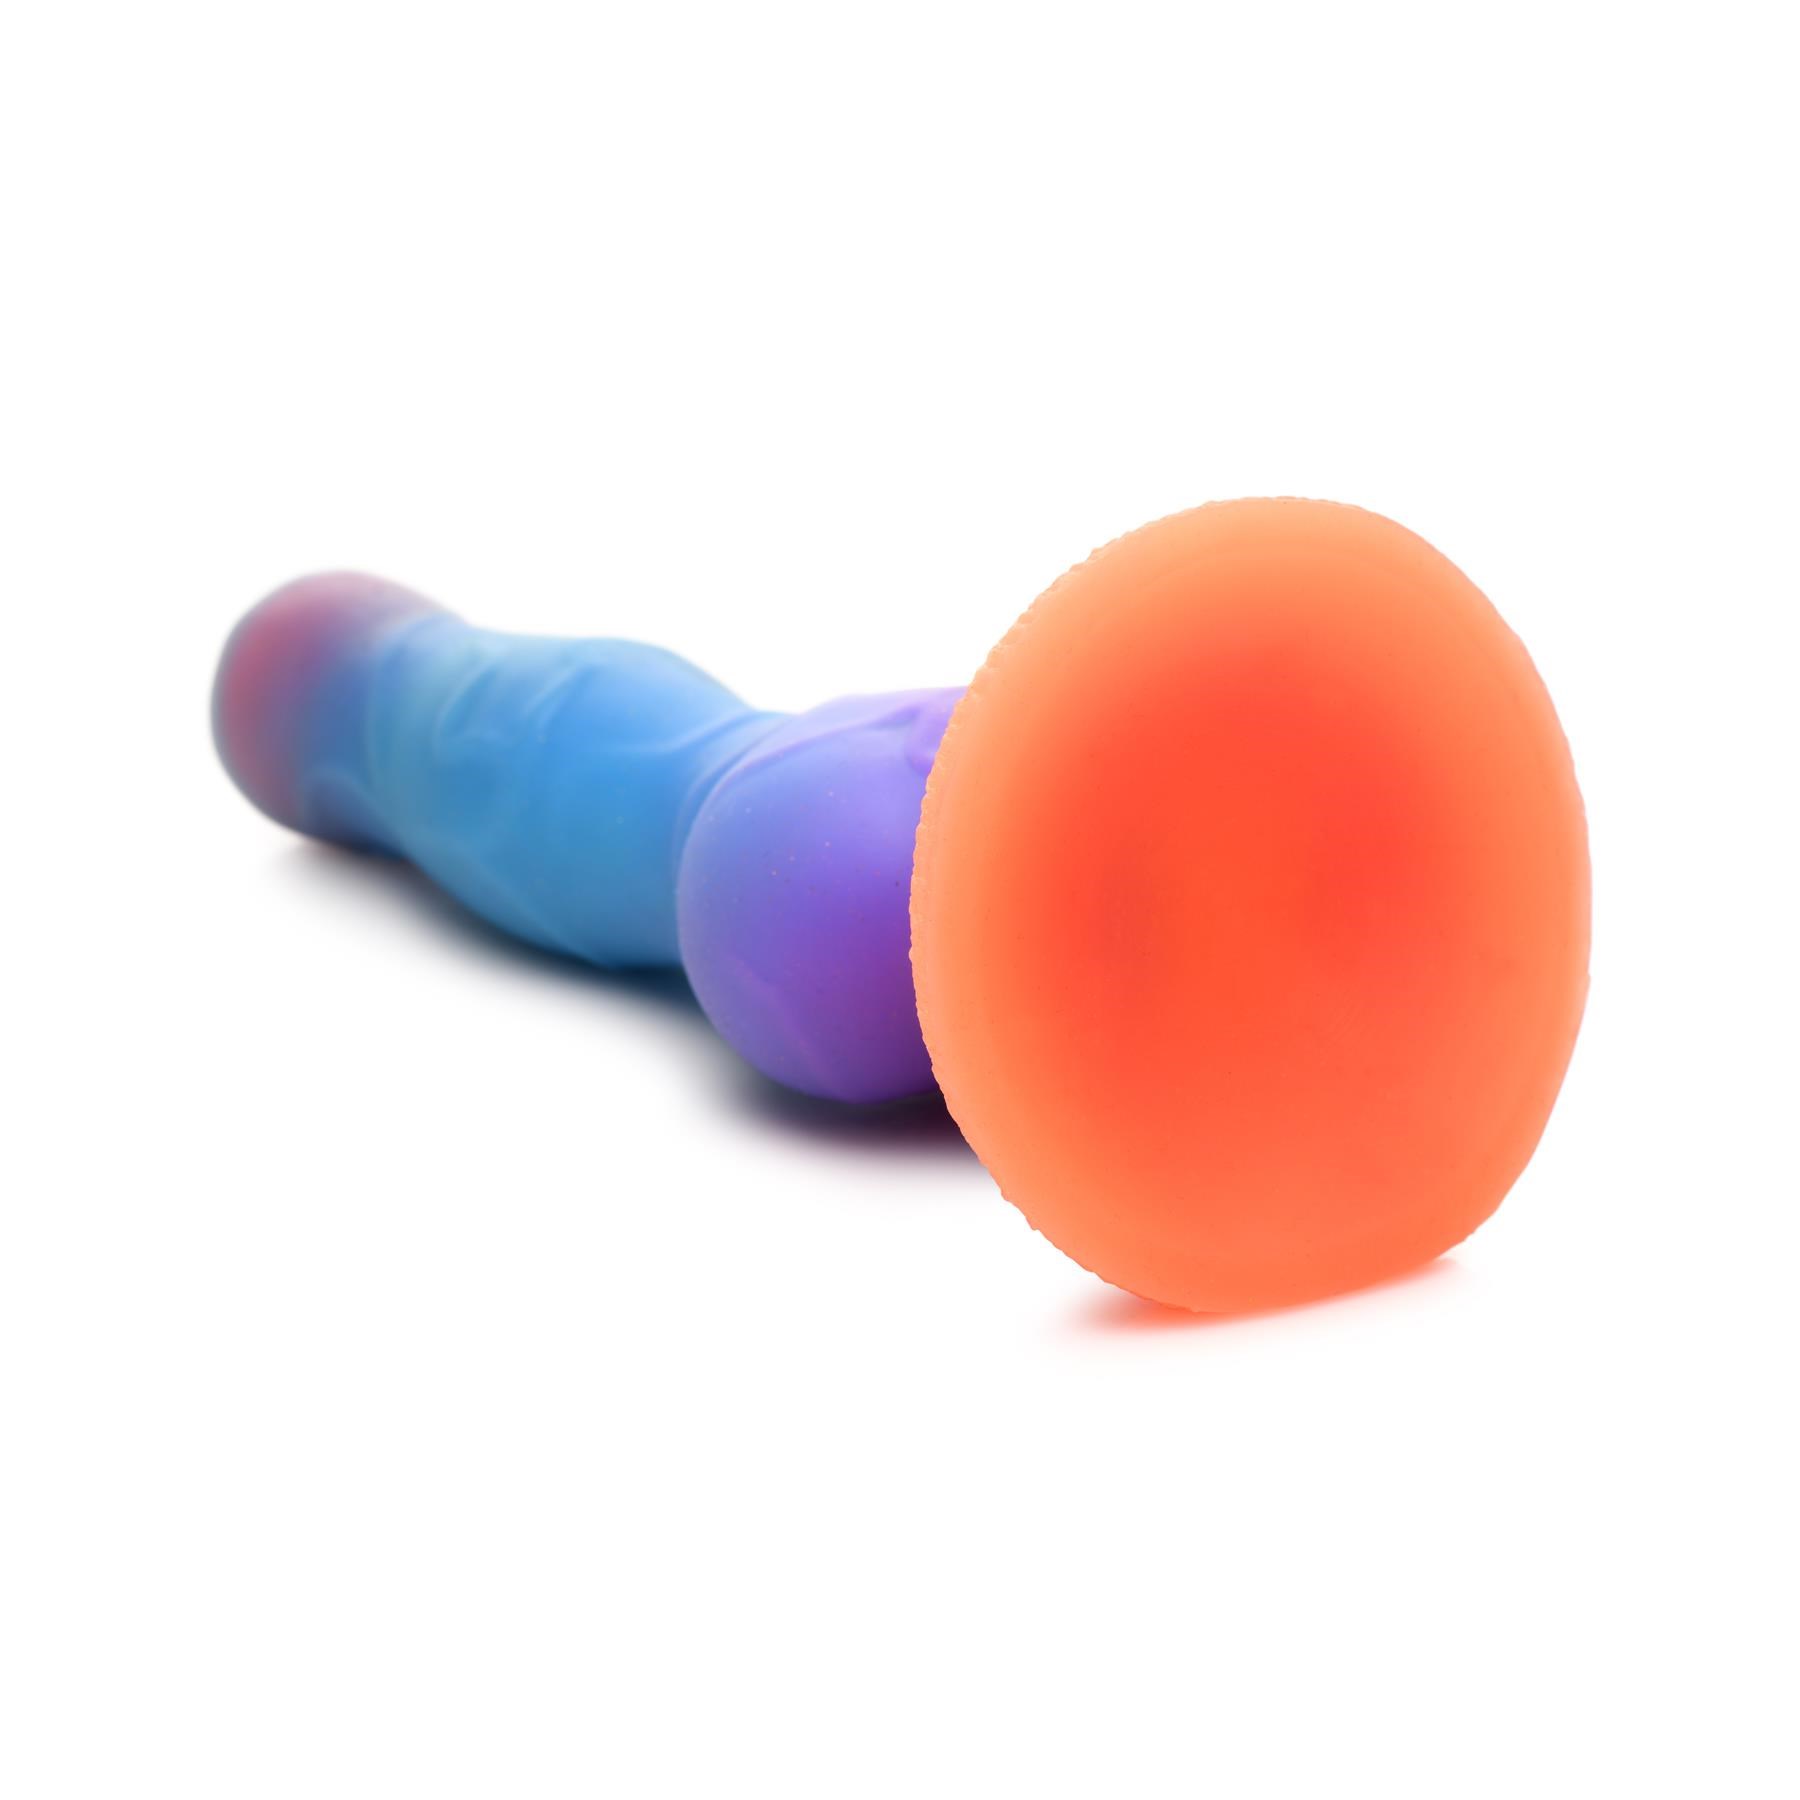 CreatureCocks Glow In The Dark Spacecock Dildo - Product Shot #6 - Suction Cup